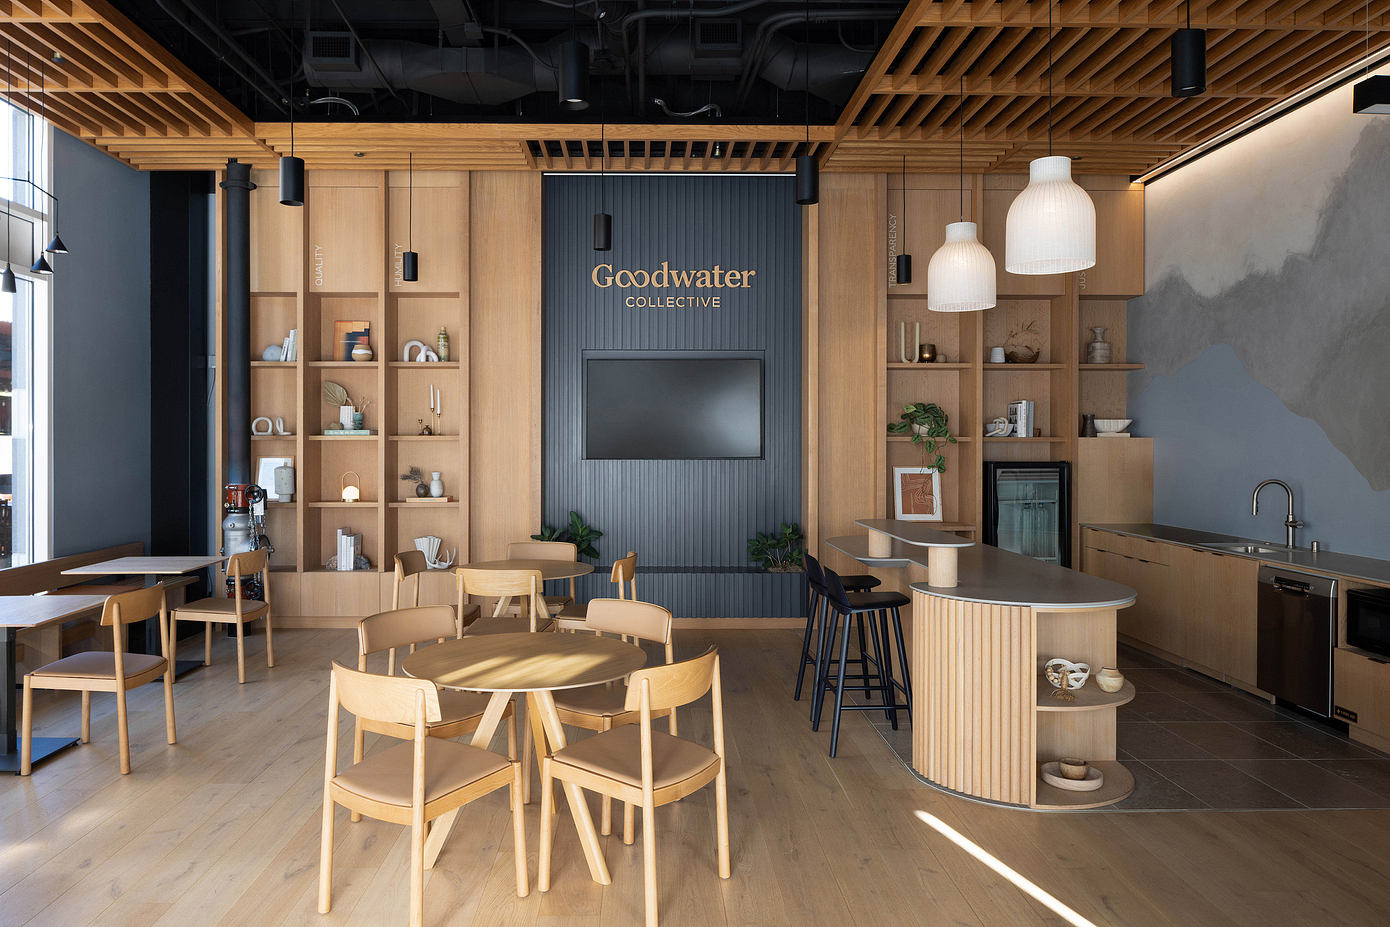 Goodwater Collective: Reimagining the Post-Pandemic Workspace